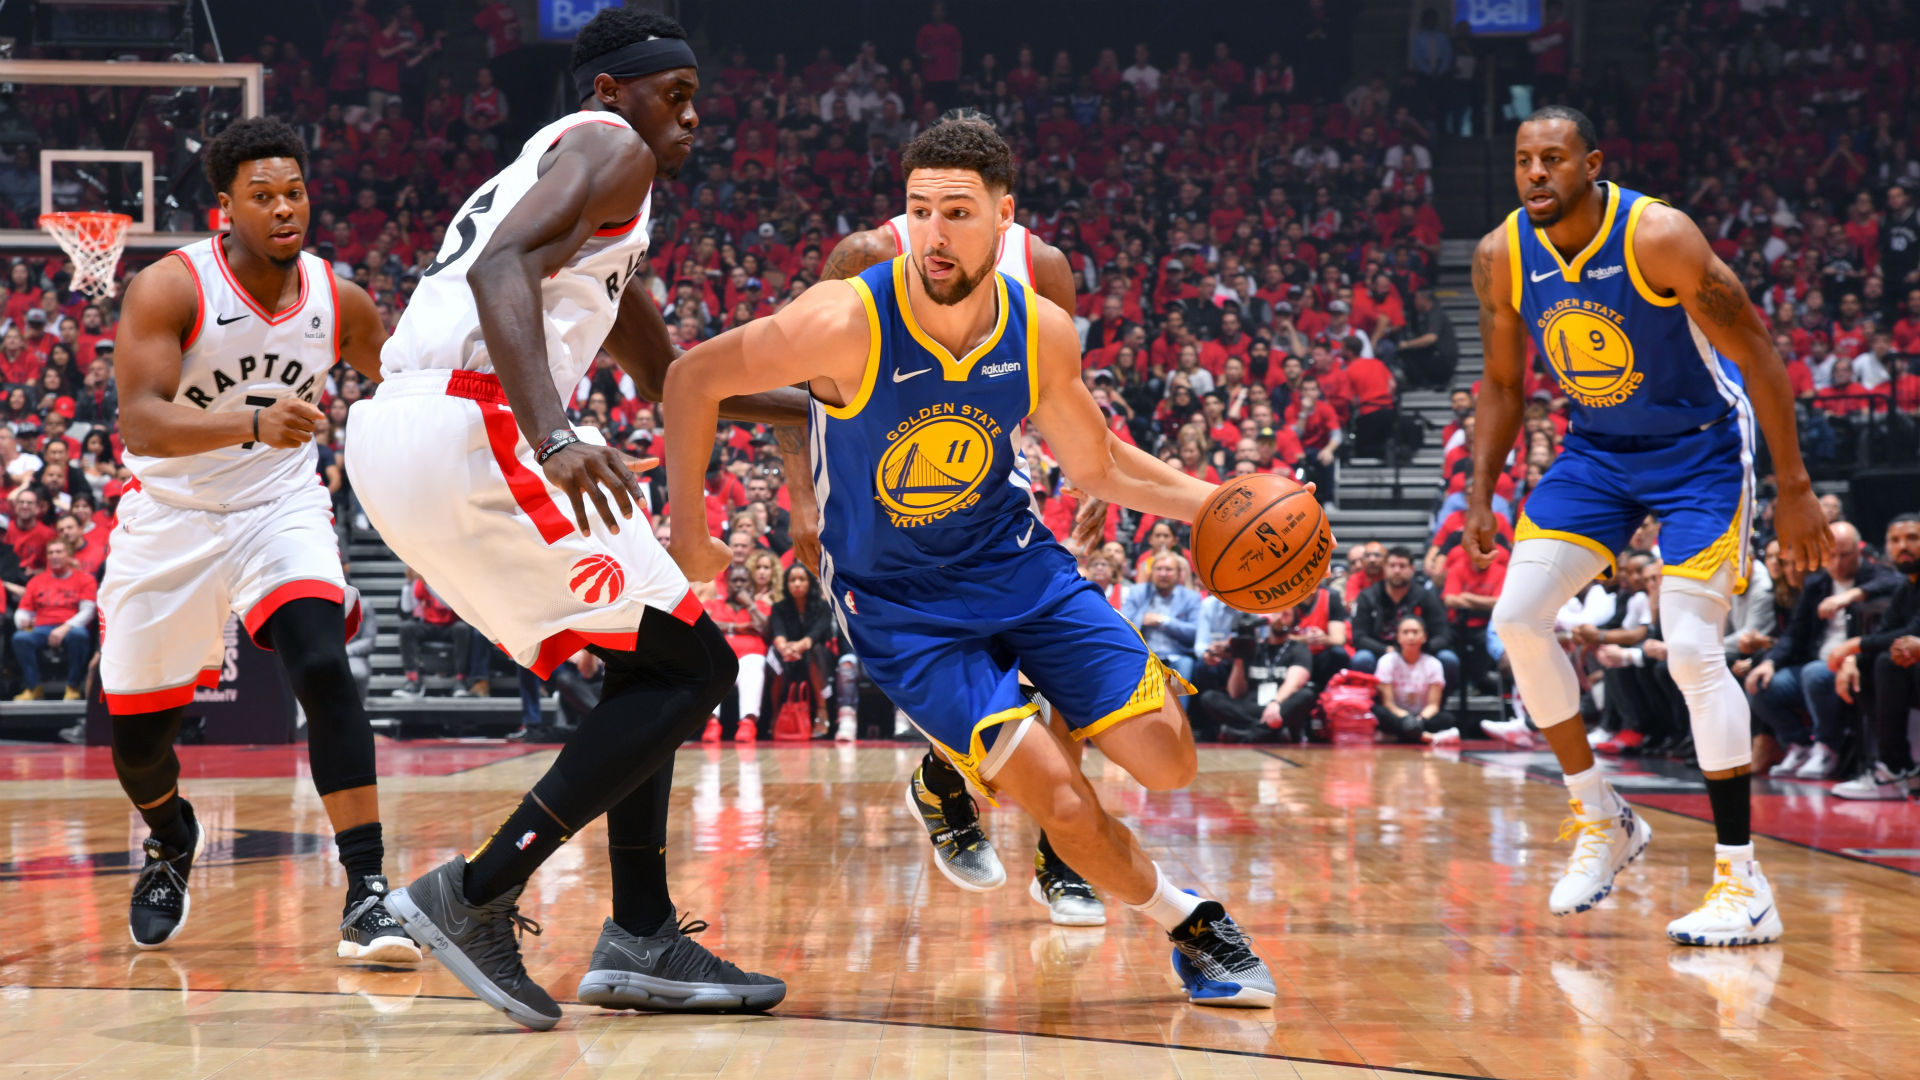 NBA Finals 2019: Inside Golden State's historic run that doomed the